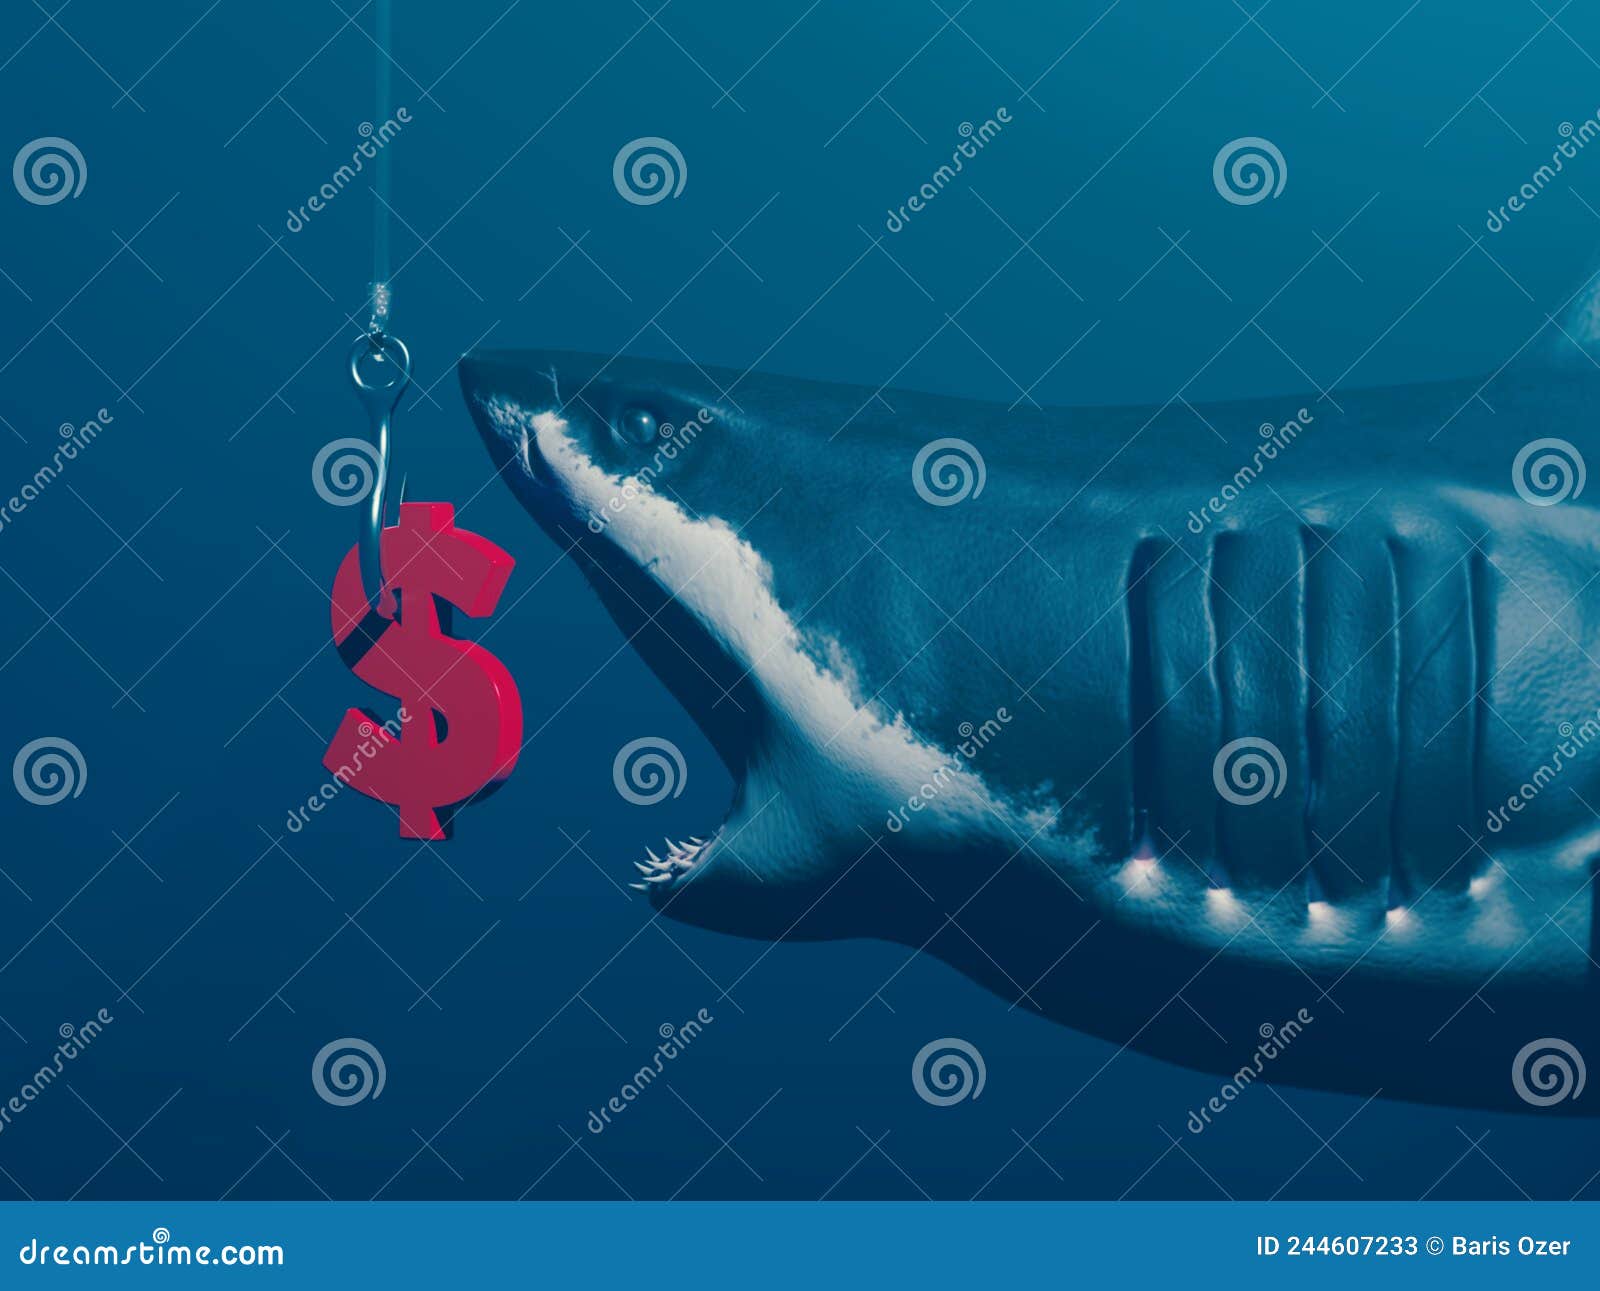 The Great White Shark, the Red-colored Dollar Symbol, and the Fishing Rod.  Stock Illustration - Illustration of large, market: 244607233